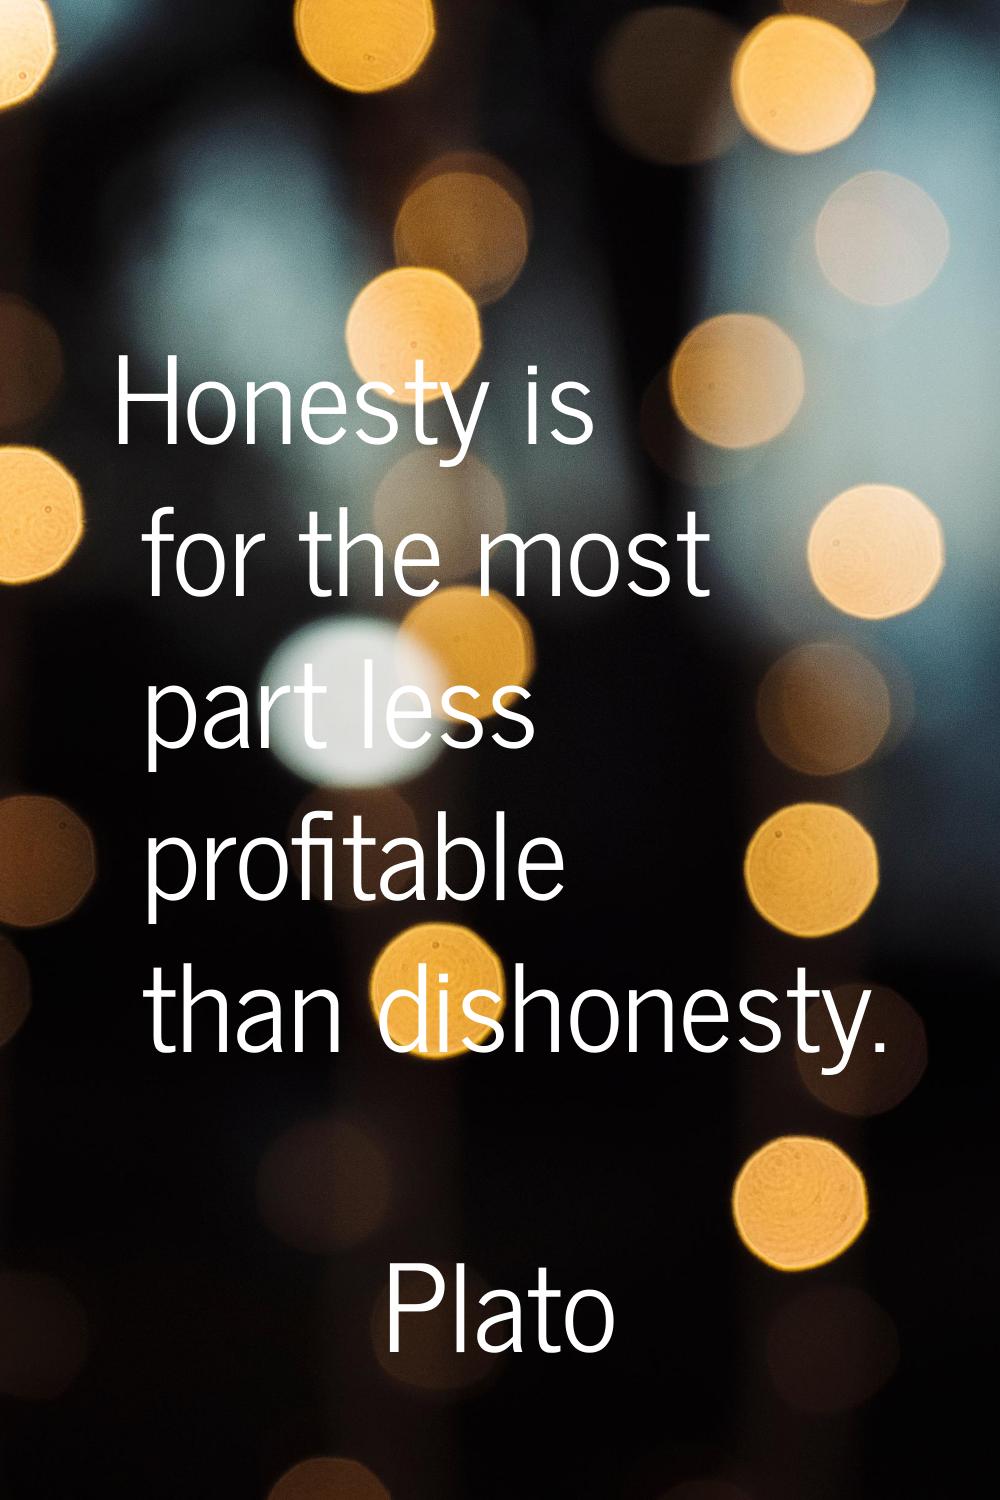 Honesty is for the most part less profitable than dishonesty.